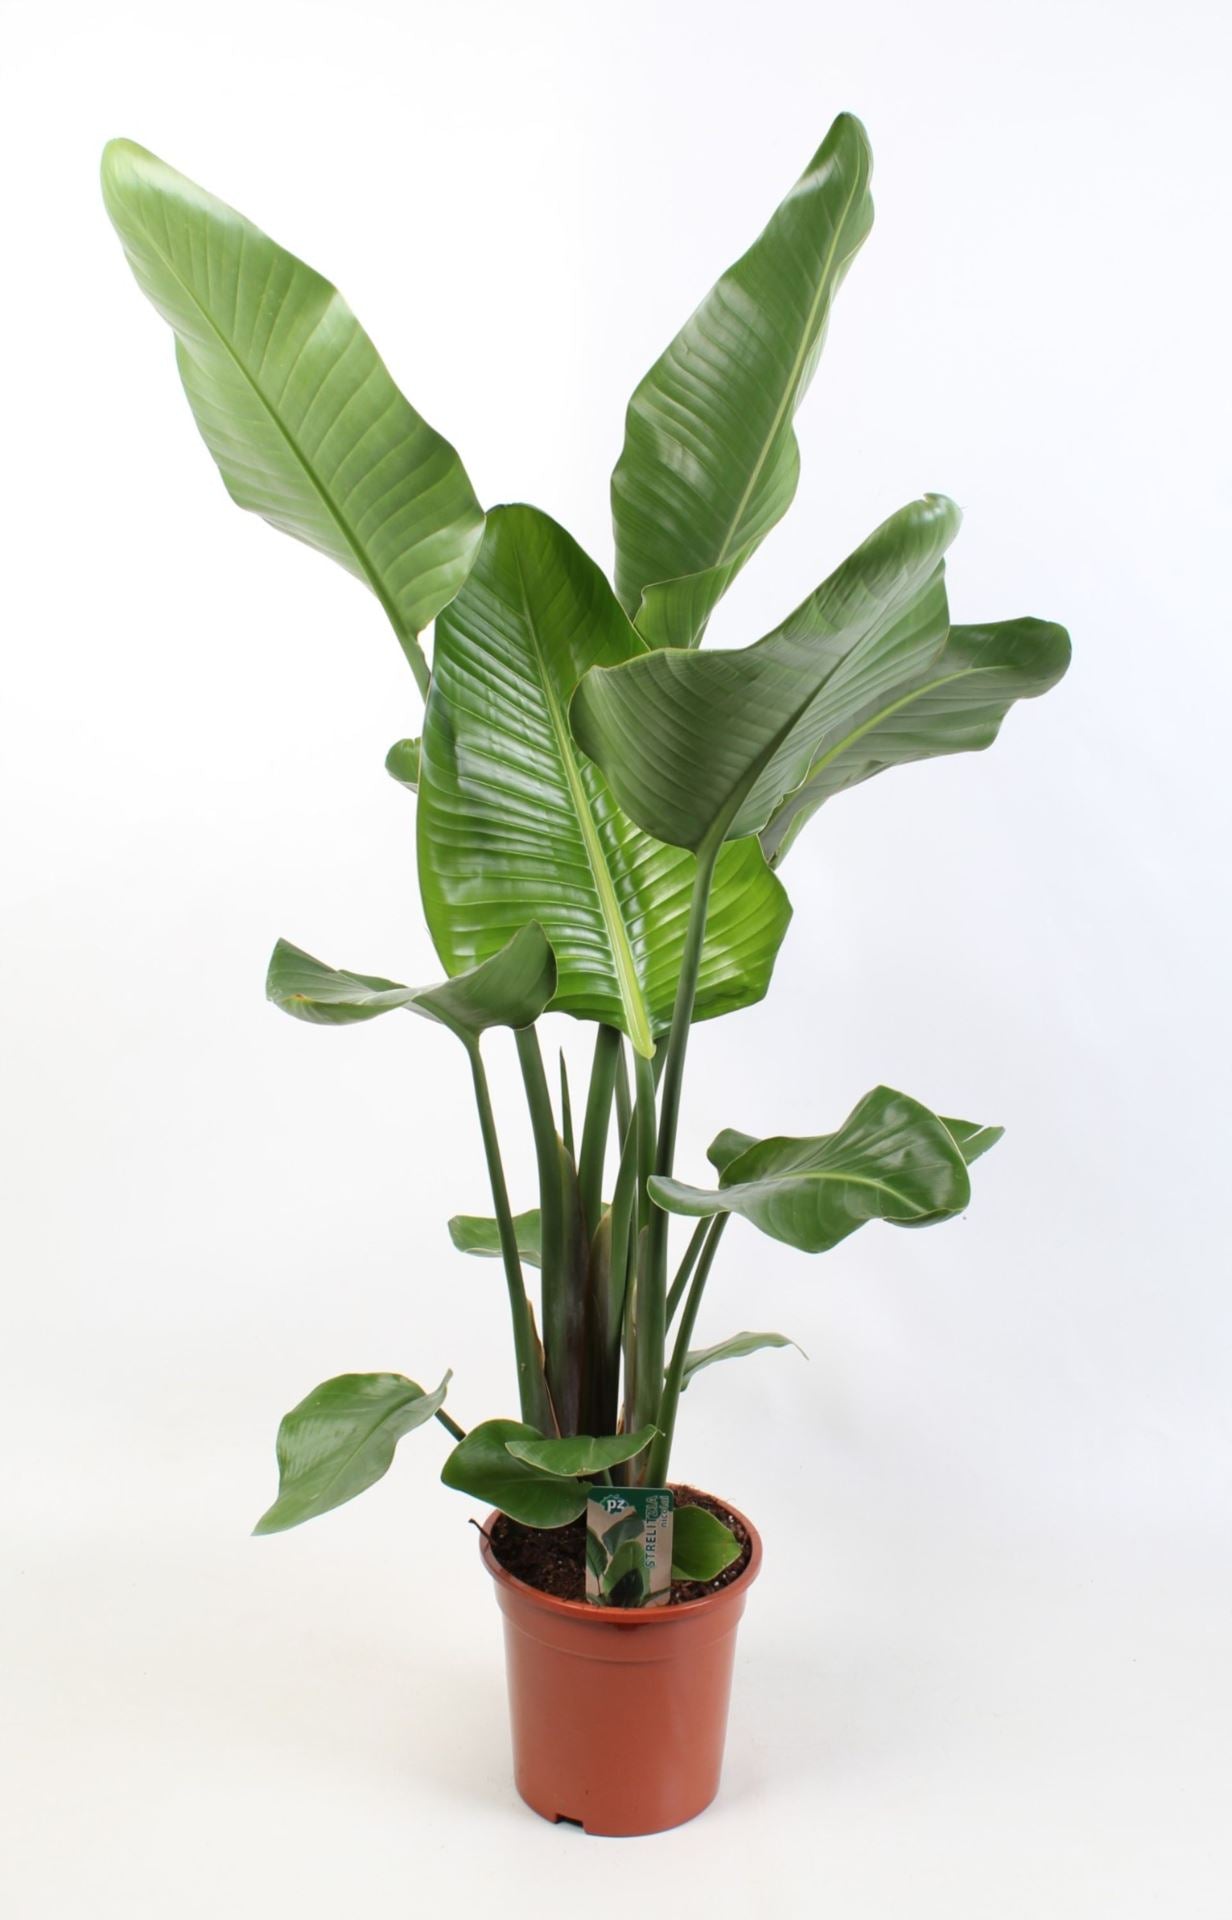 Strelitzia Nicolai (Bird of Paradise Plant) featuring large, lush banana-like leaves, standing 180cm tall, displayed in a stylish indoor setting.